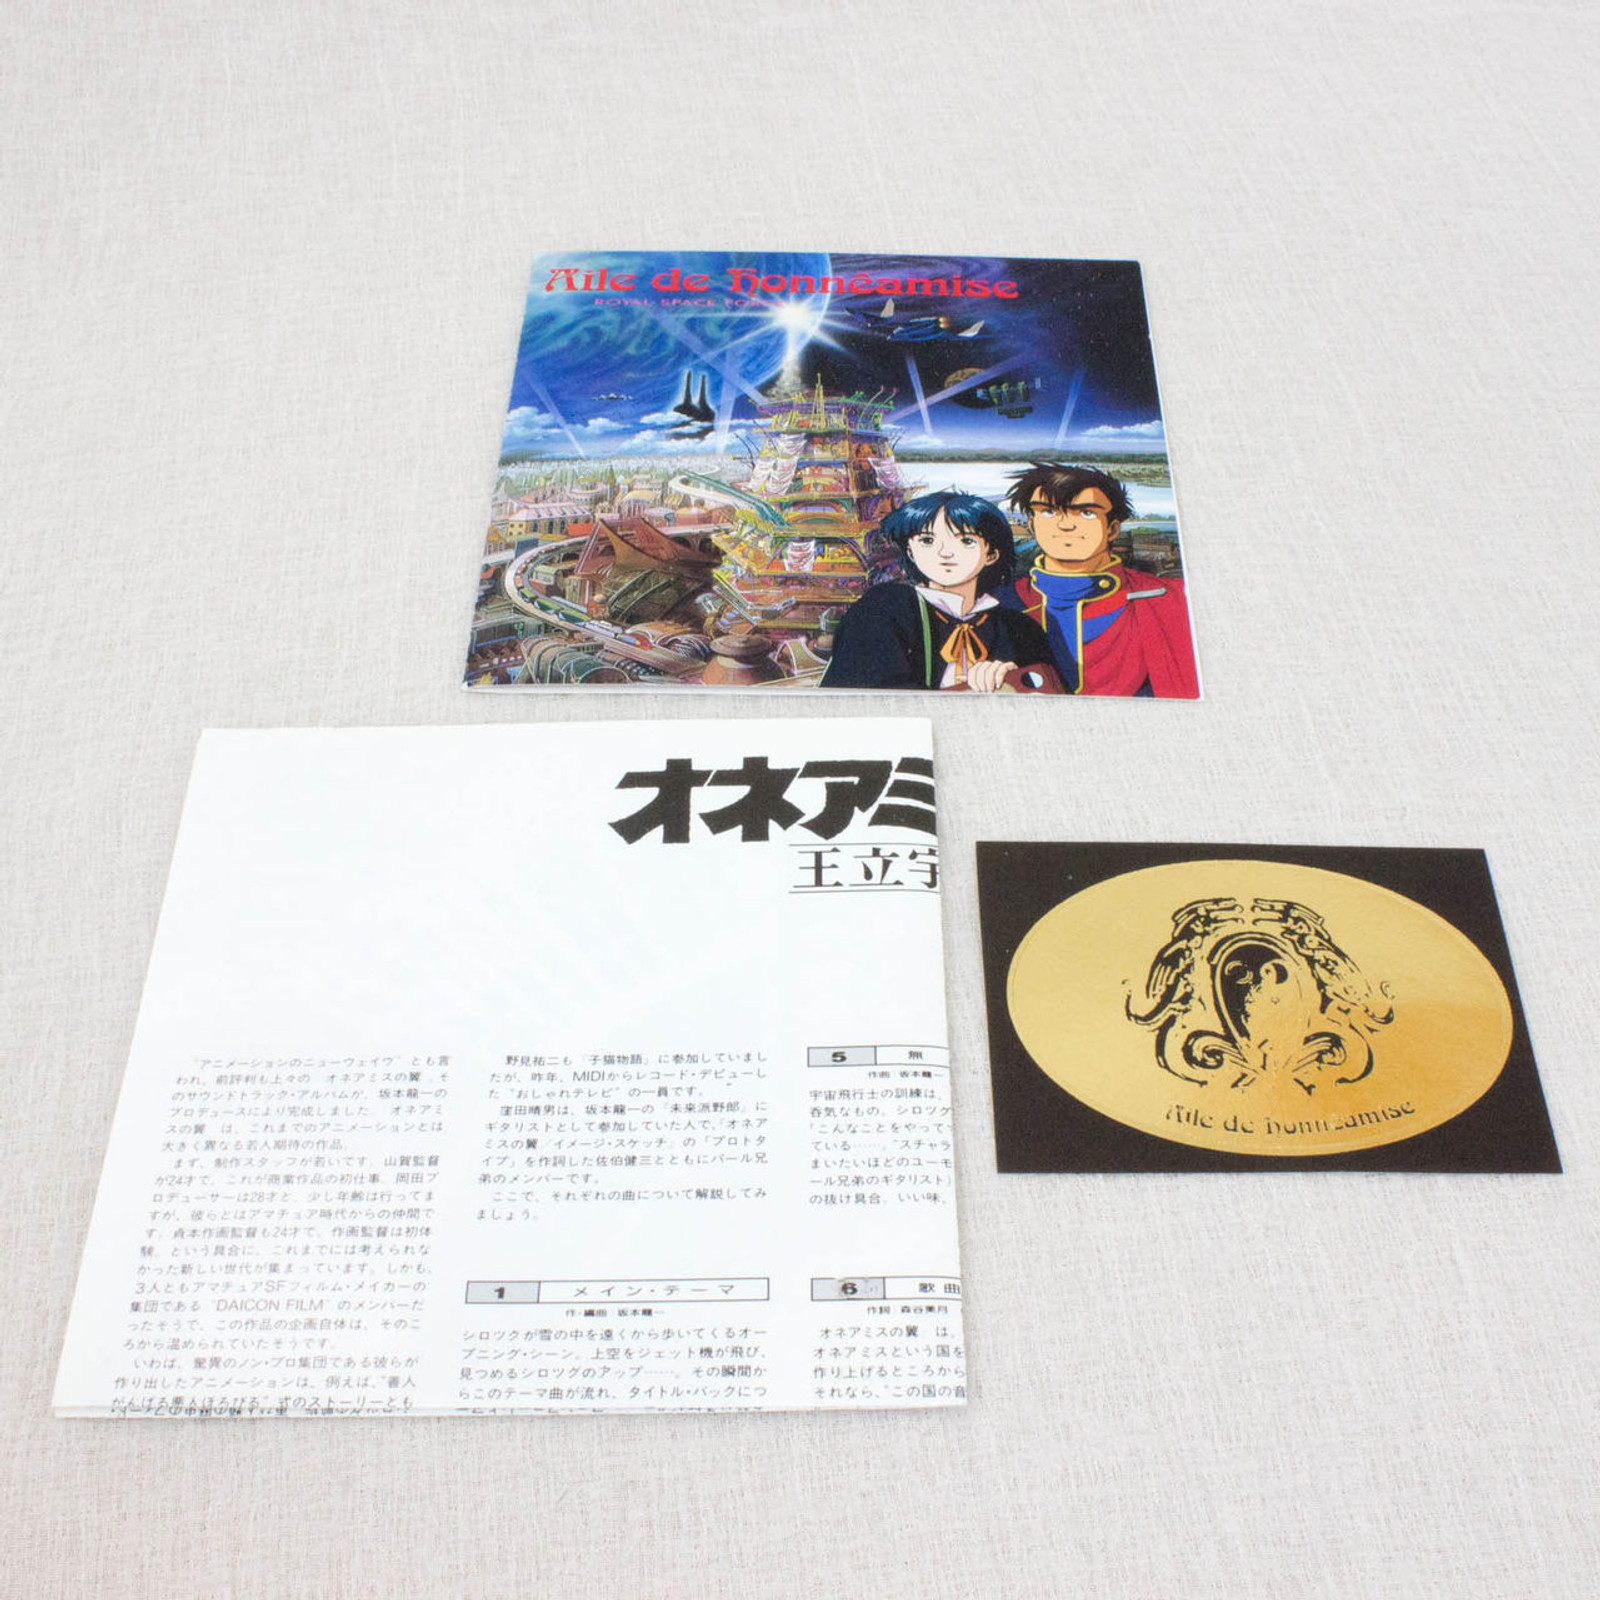 Aile de Honneamise Royal Space Force : The Wings of Honnêamise Soundtrack CD Album 35MD-1025 JAPAN WING